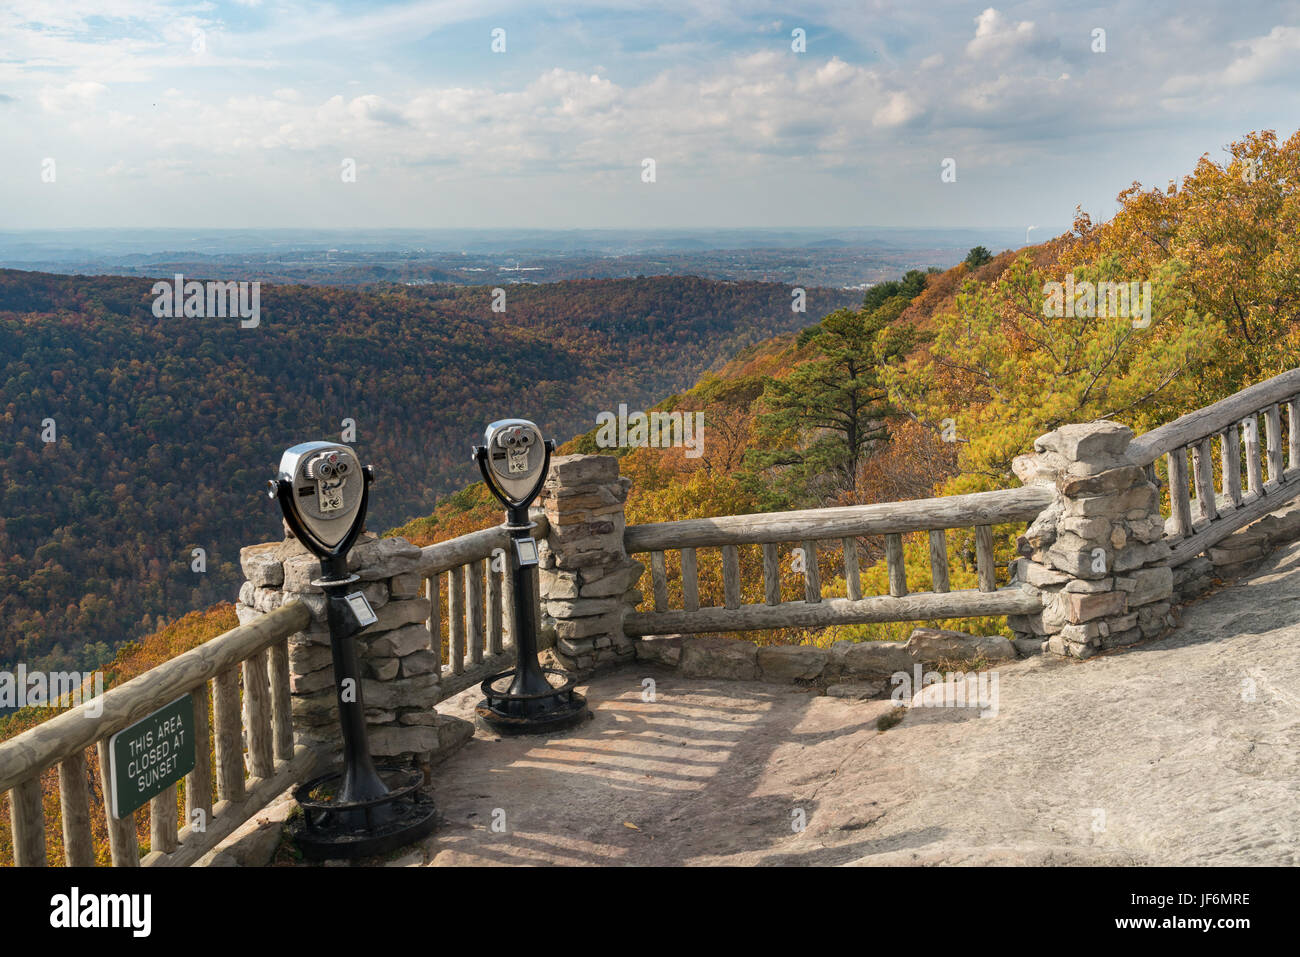 Coin operated binoculars at Coopers Rock Stock Photo